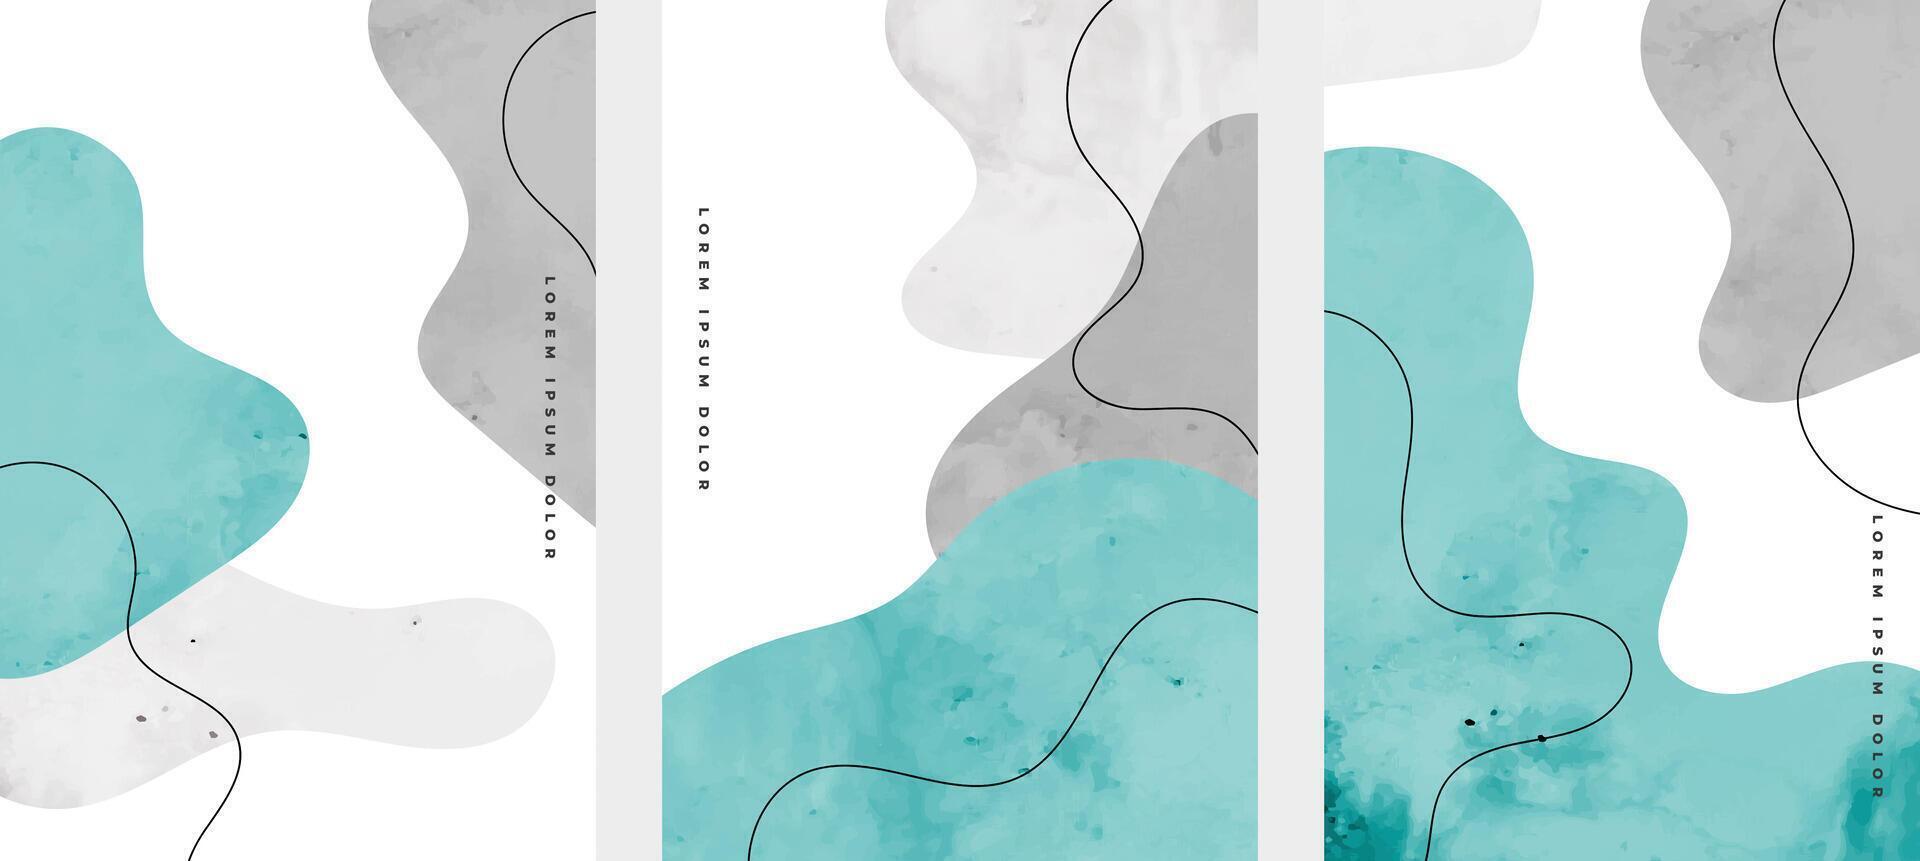 set of hand painted abstract cover pages design vector